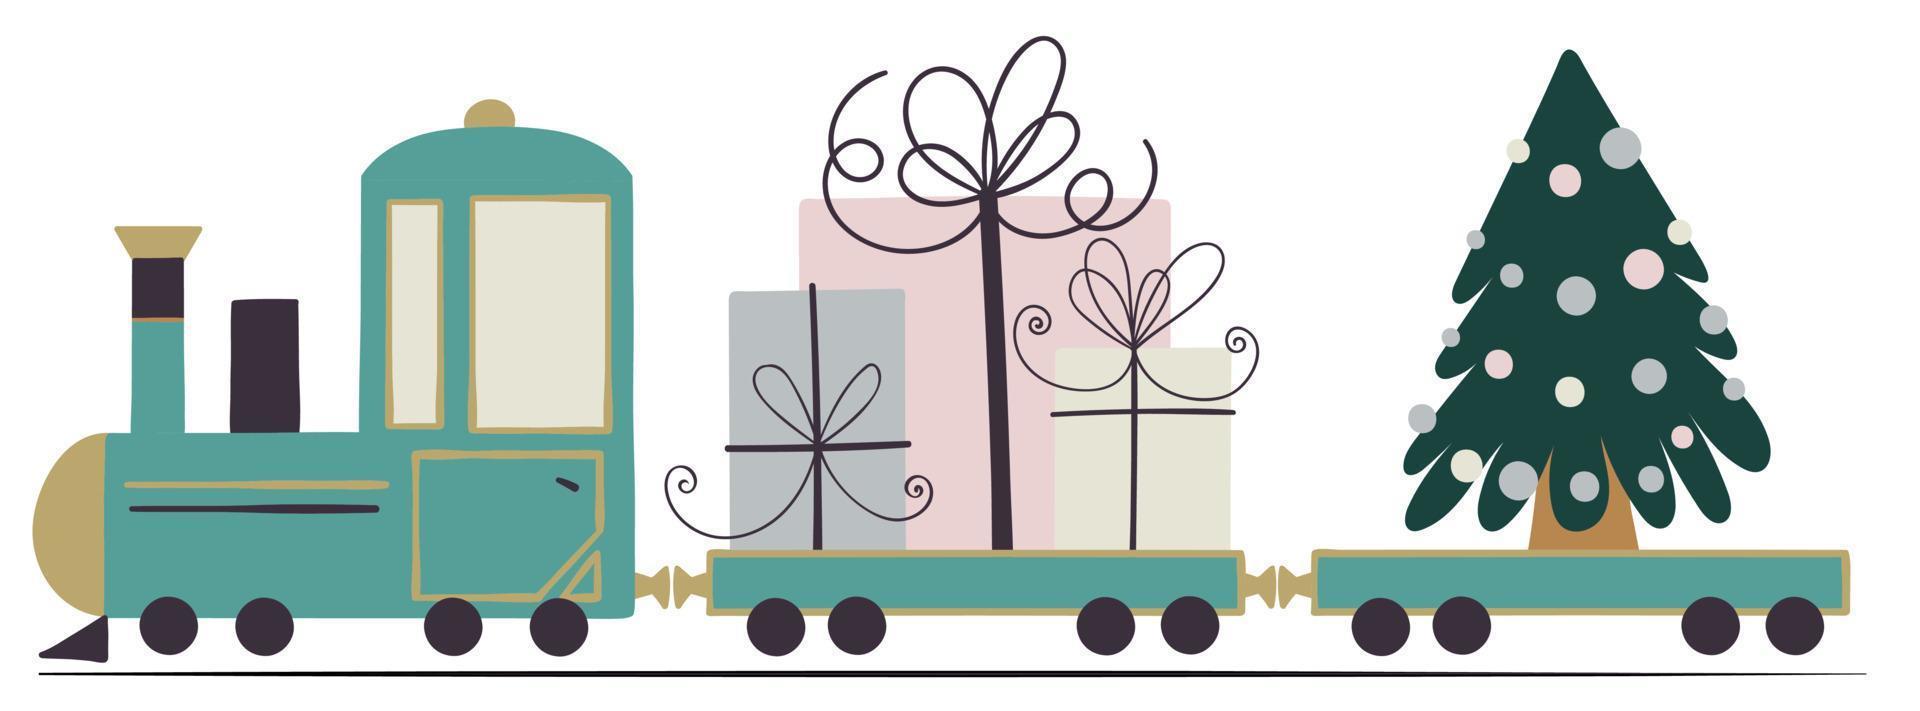 Blue toy train with cute gift boxes and Christmas tree with decor. vector